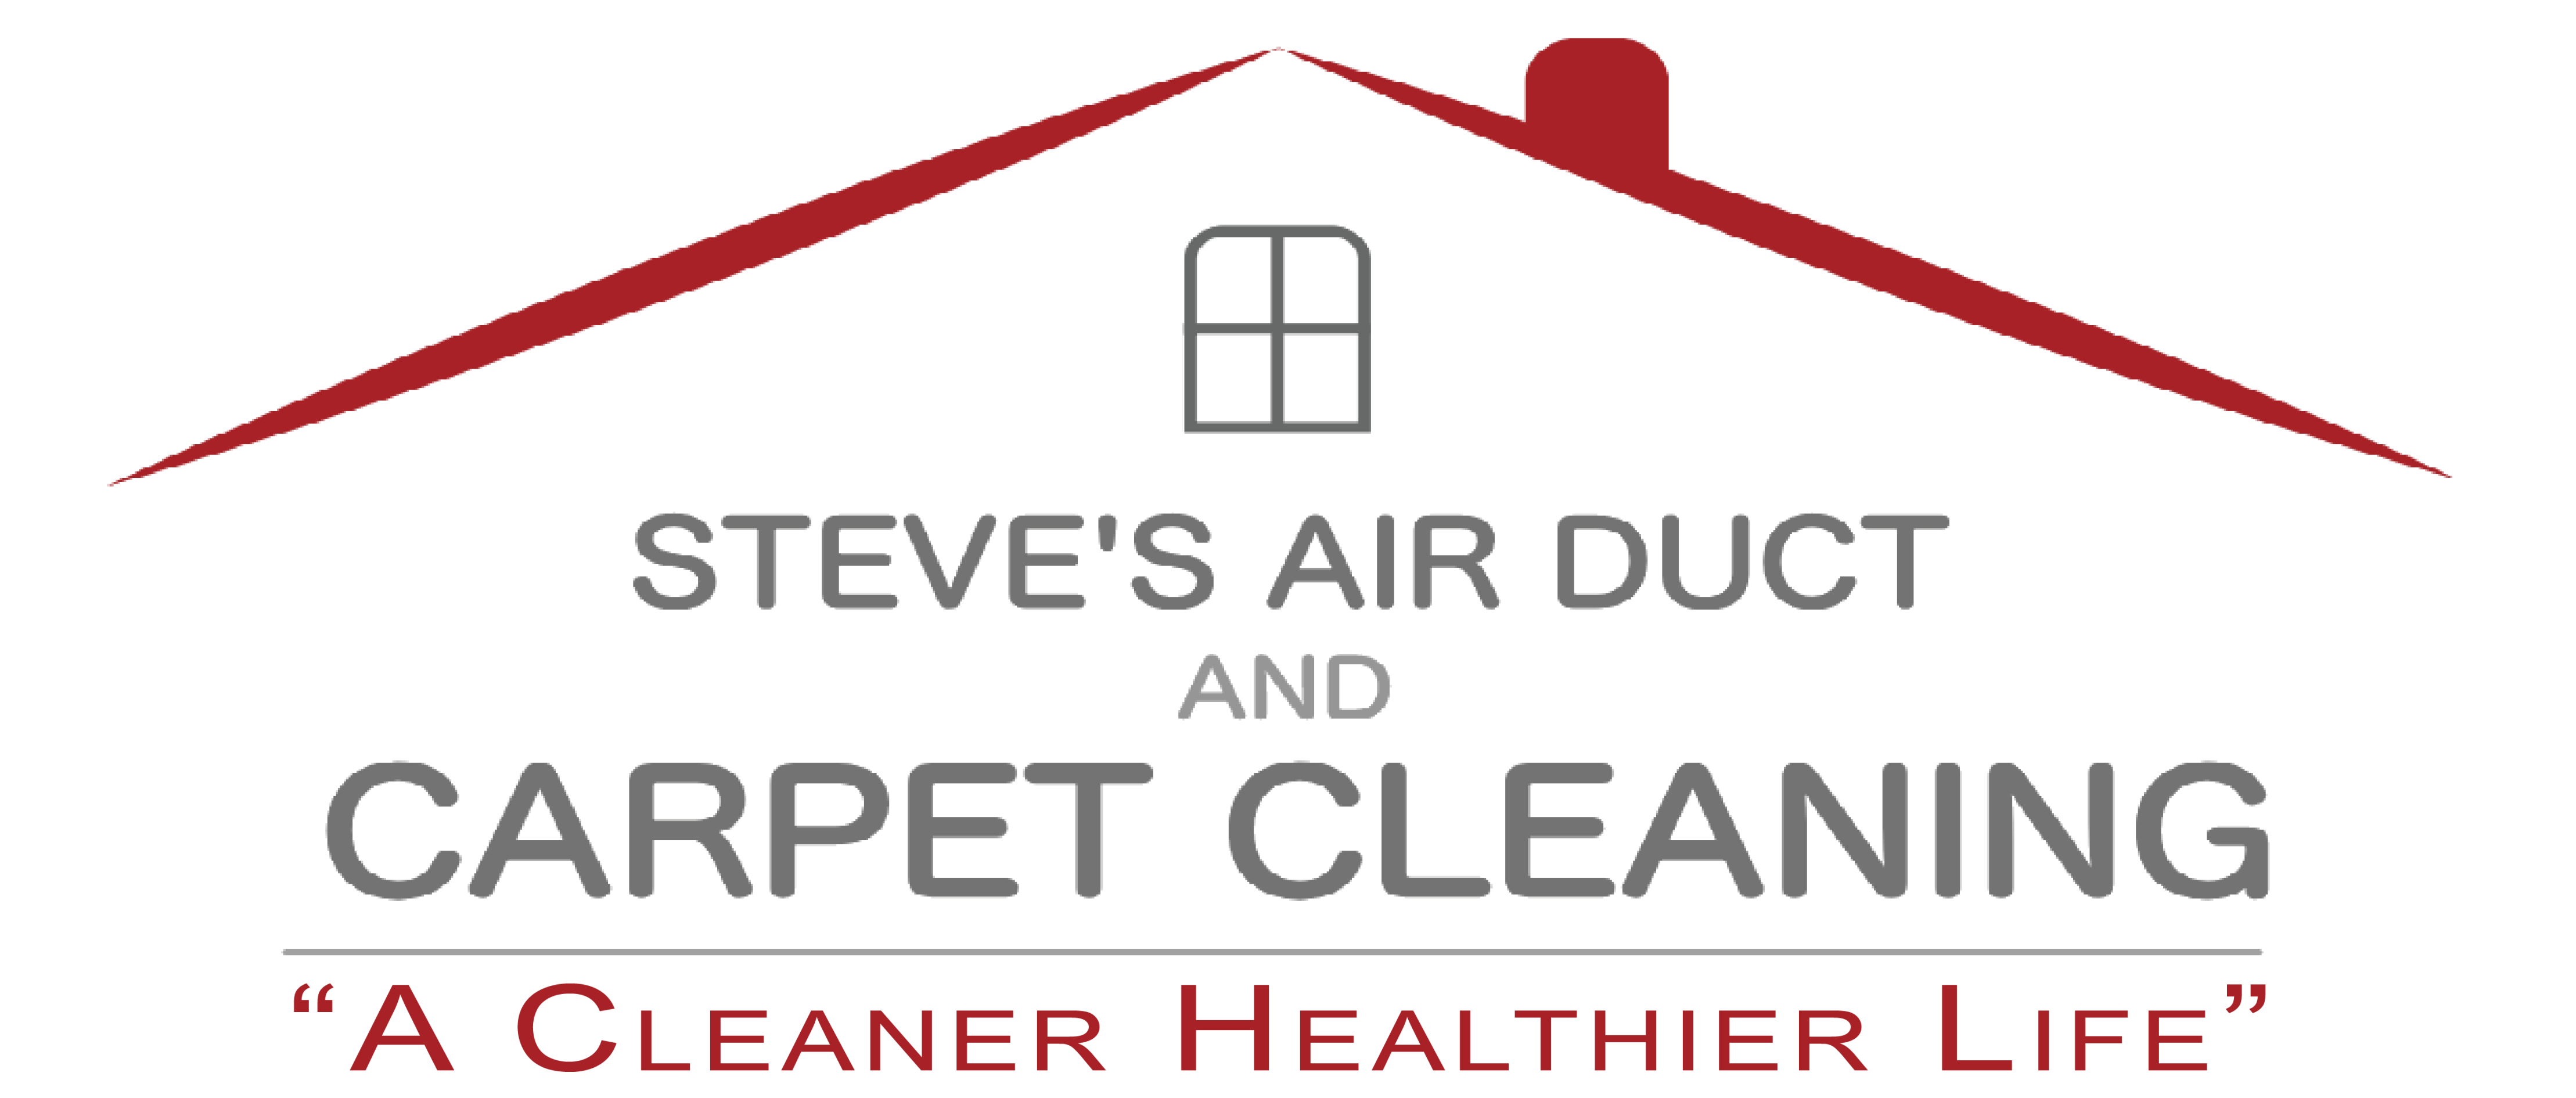 Steves Carpet Cleaning and Air Duct Cleaning Company Logo